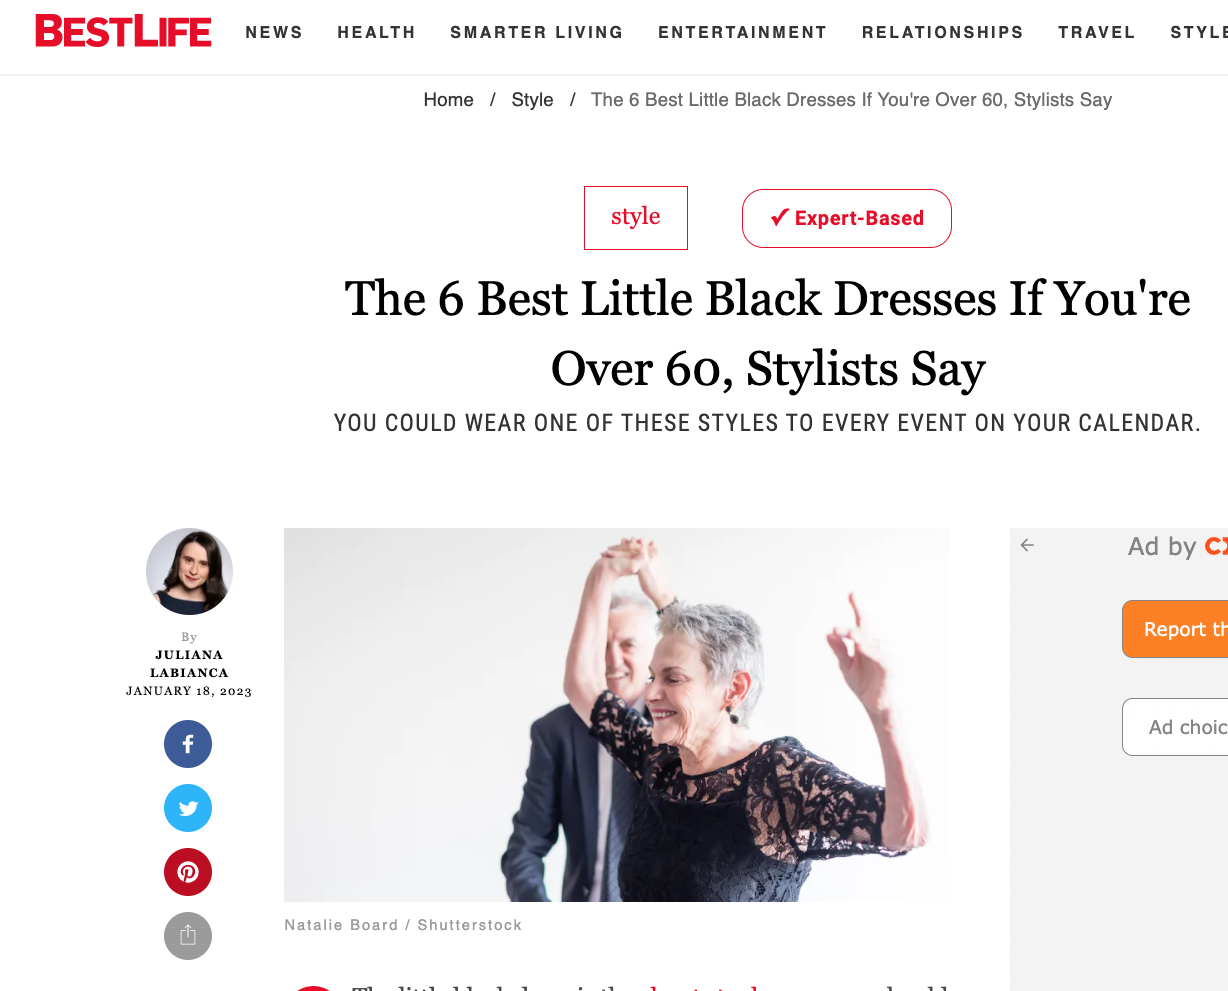 Best Life: The 6 Best Little Black Dresses If You're Over 60, Stylists Say